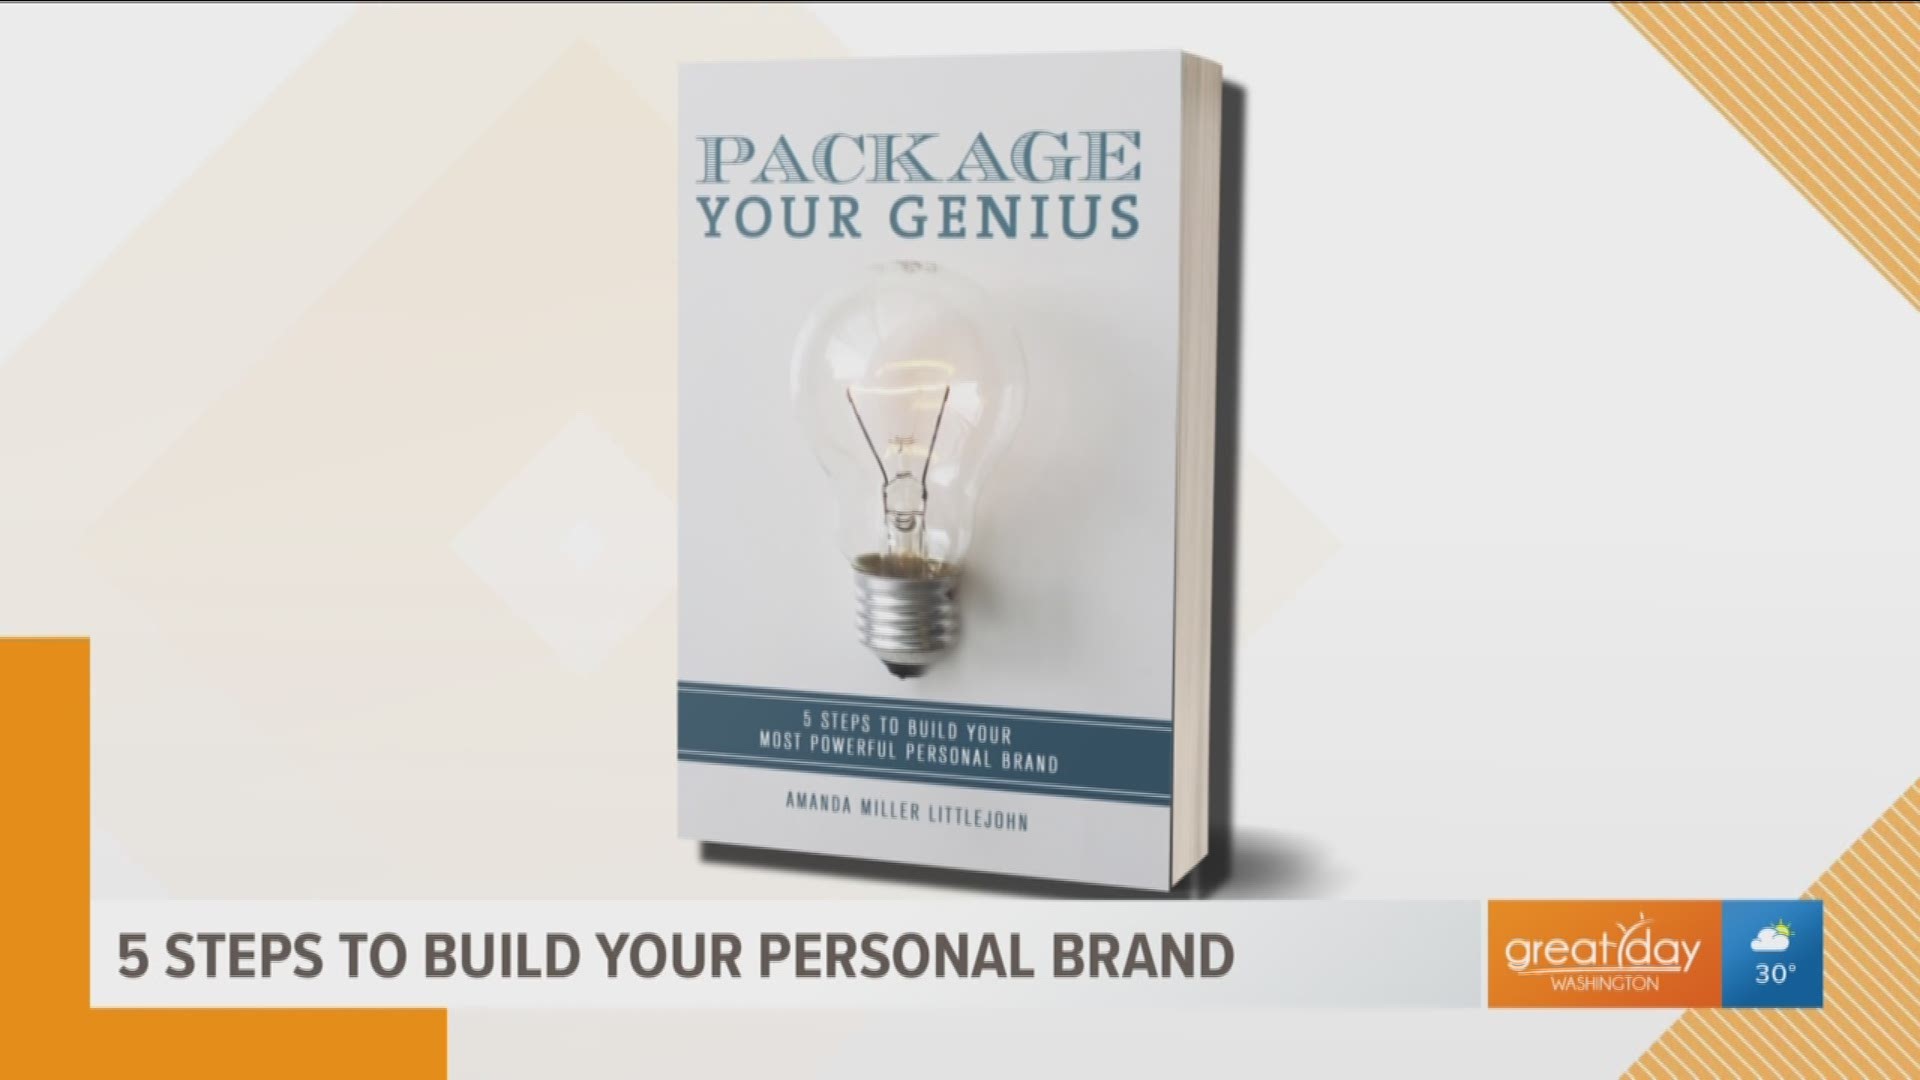 Author Amanda Miller Littlejohn explains how her new book "Package Your Genius: 5 Steps to Build Your Most Powerful Personal Brand" can teach you how to leverage your expertise into a successful side hustle.